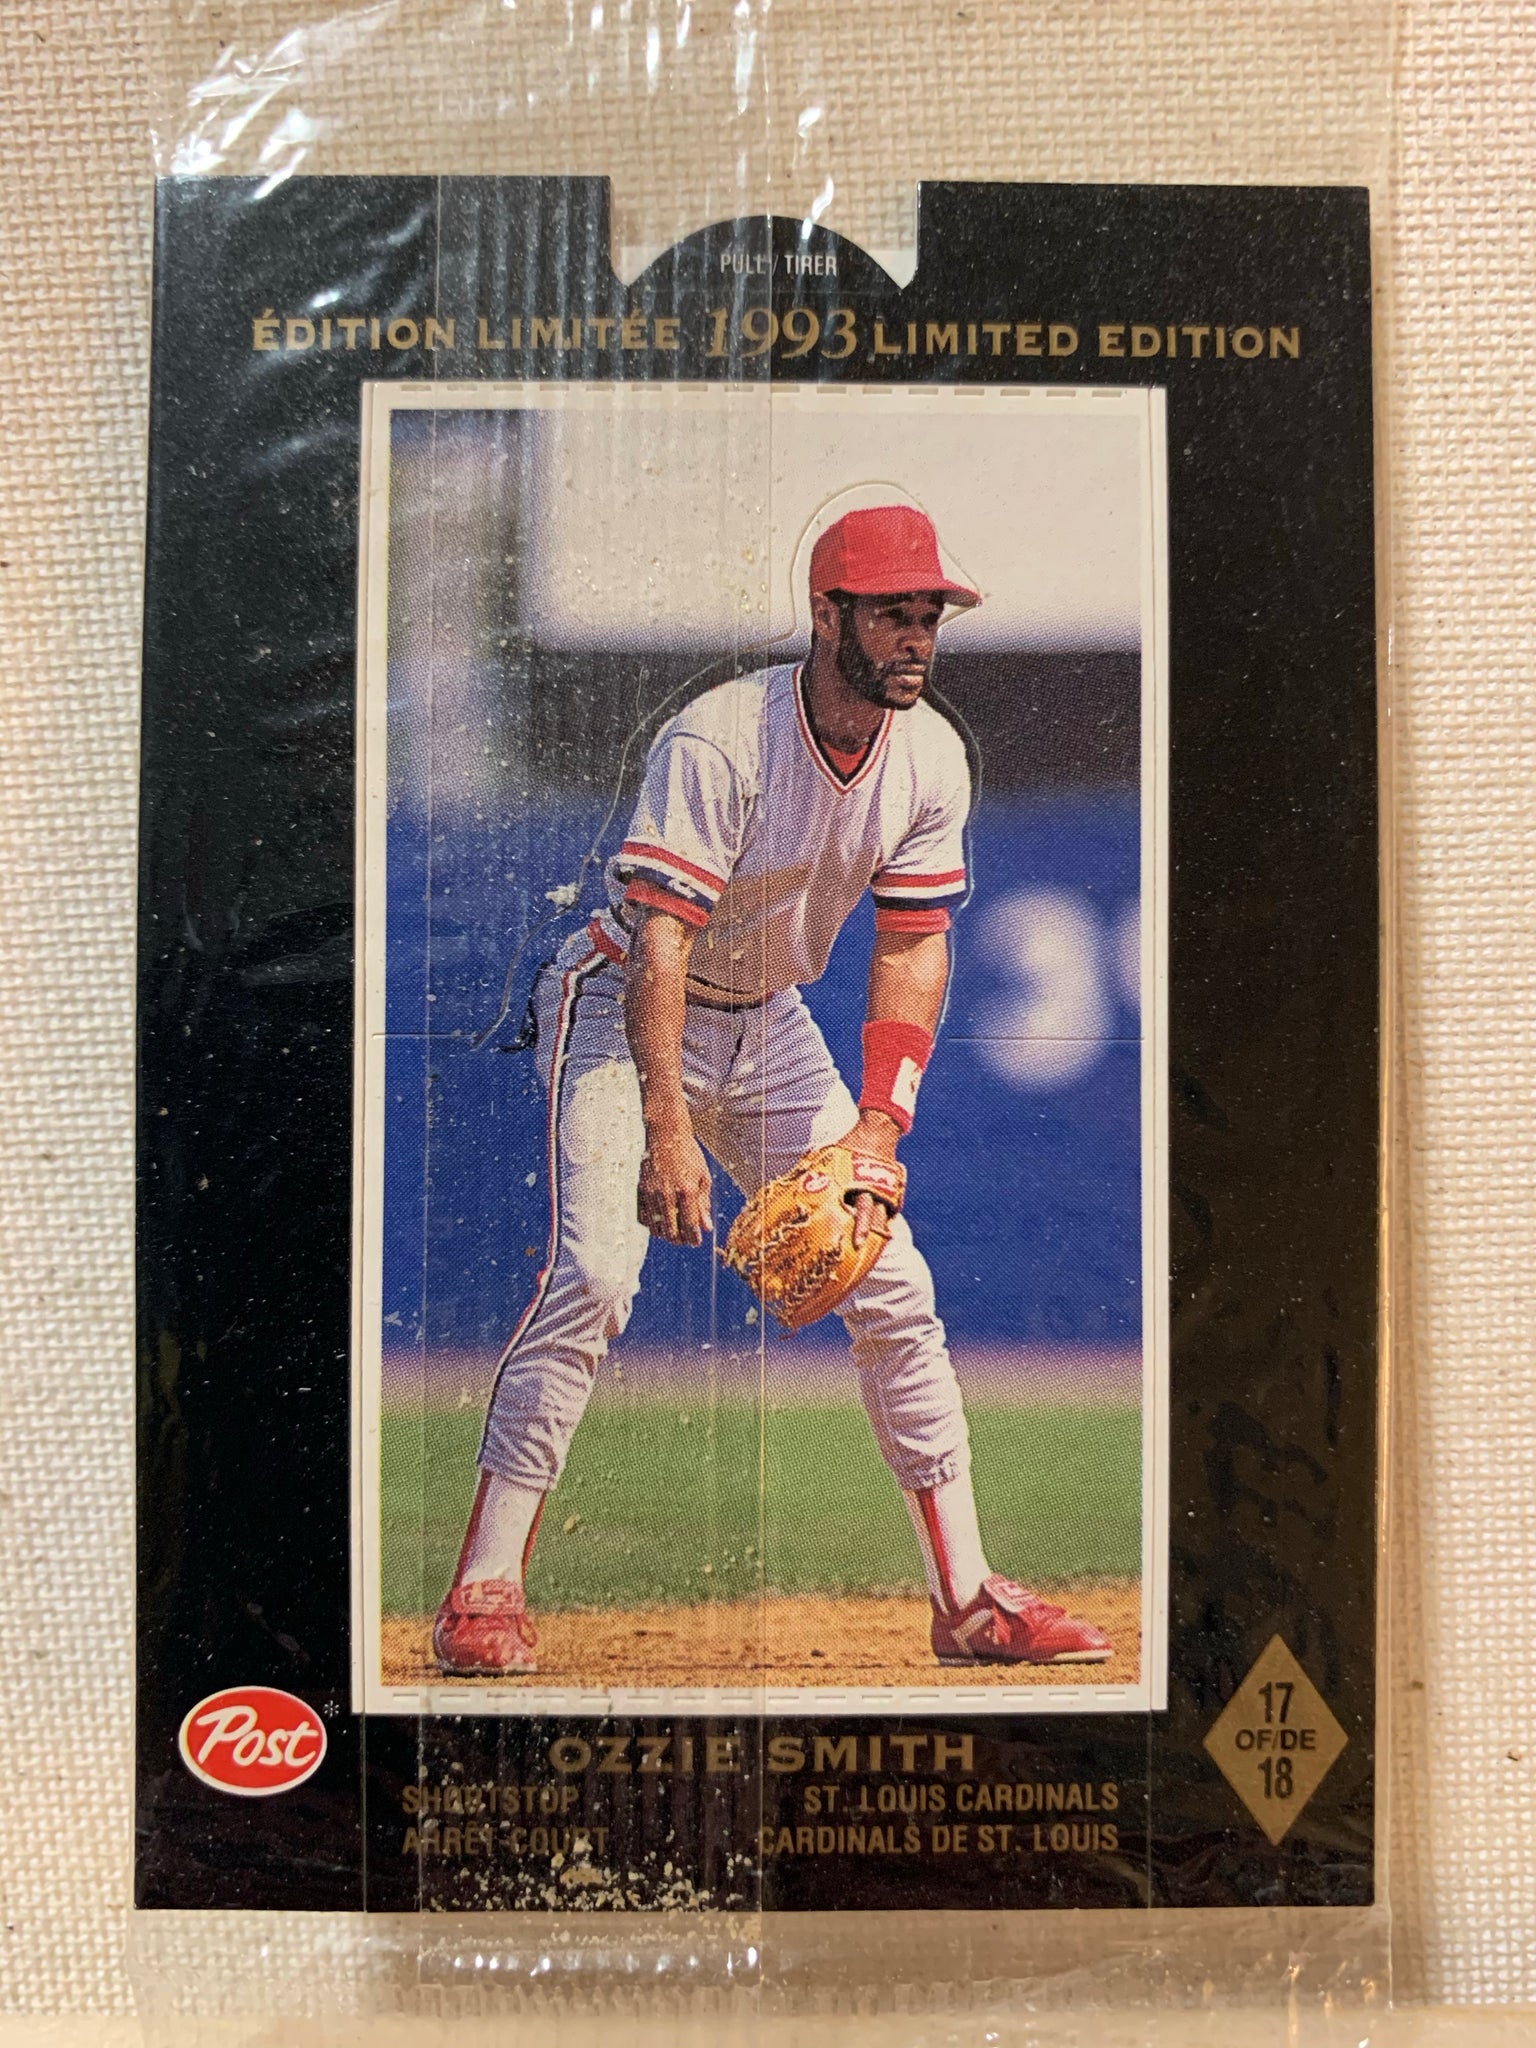 1993-94 BASEBALL #17 OF 18 - OZZIE SMITH 1993 POST CEREAL LIMITED EDITION CARD RAW